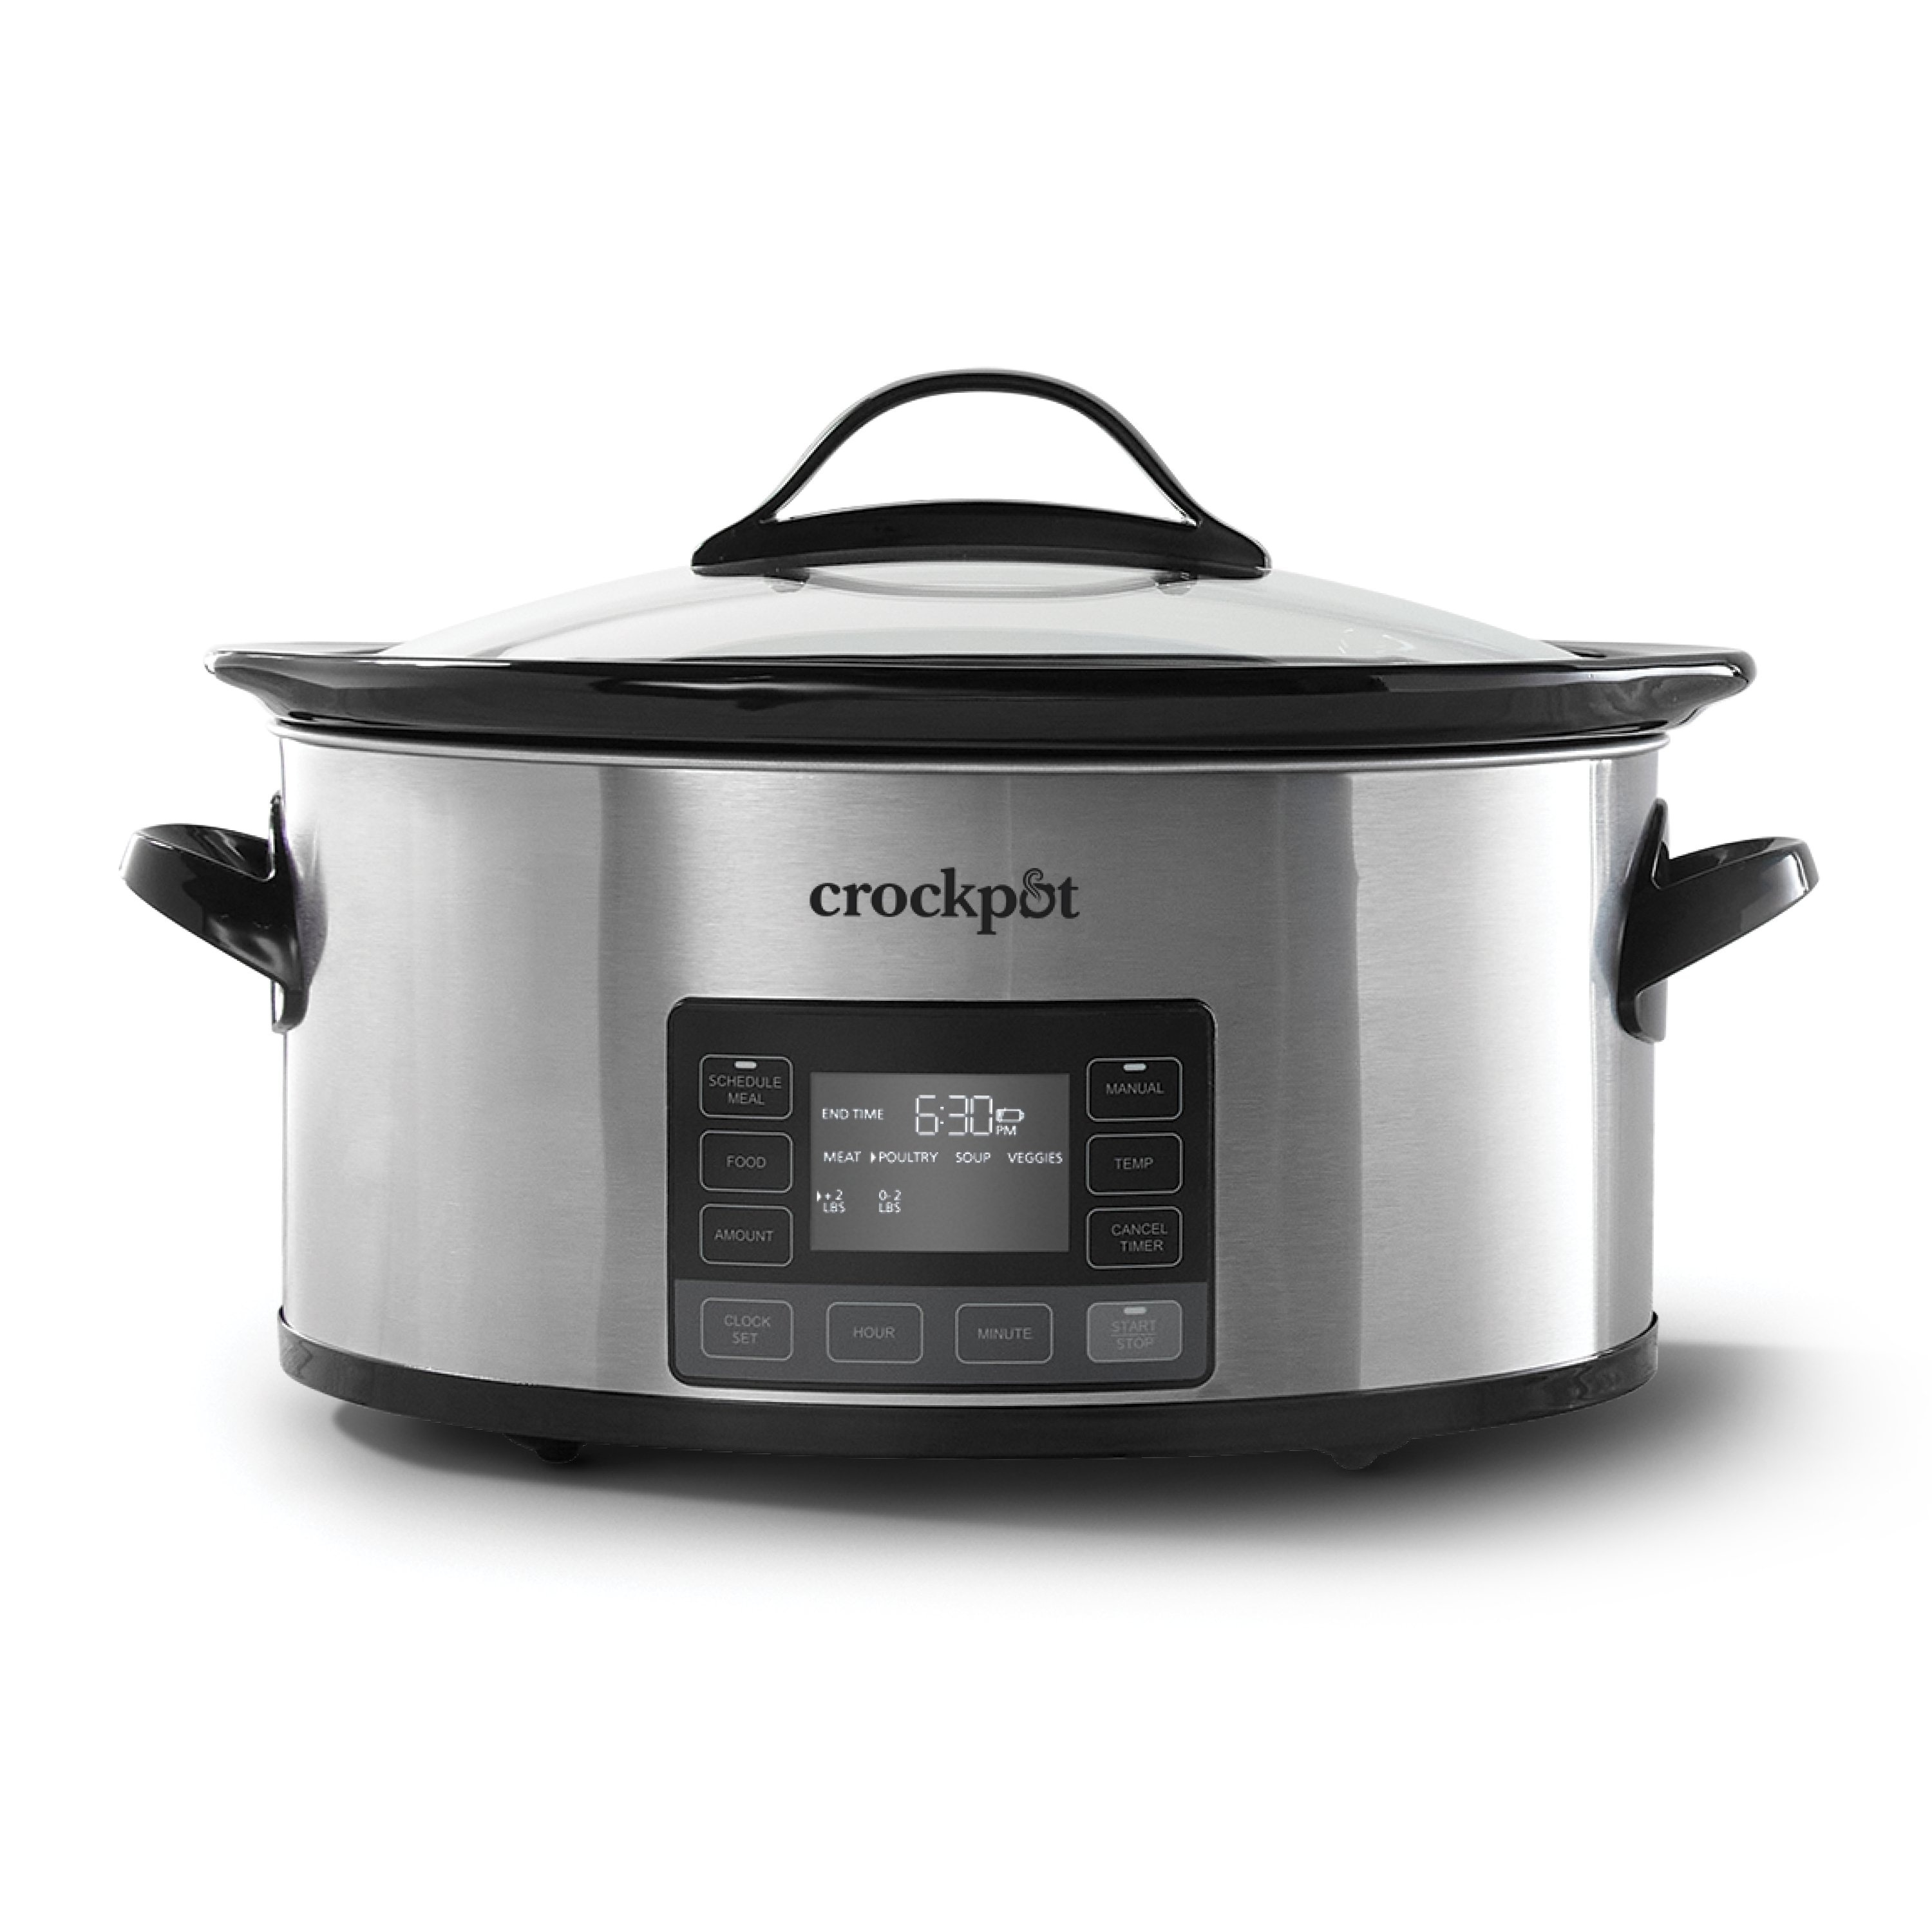 https://ak1.ostkcdn.com/images/products/is/images/direct/40661b6a6d294ab3b4e8a340ec4df69de875f1f7/Crockpot-6-Quart-Slow-Cooker-with-MyTime-Technology.jpg